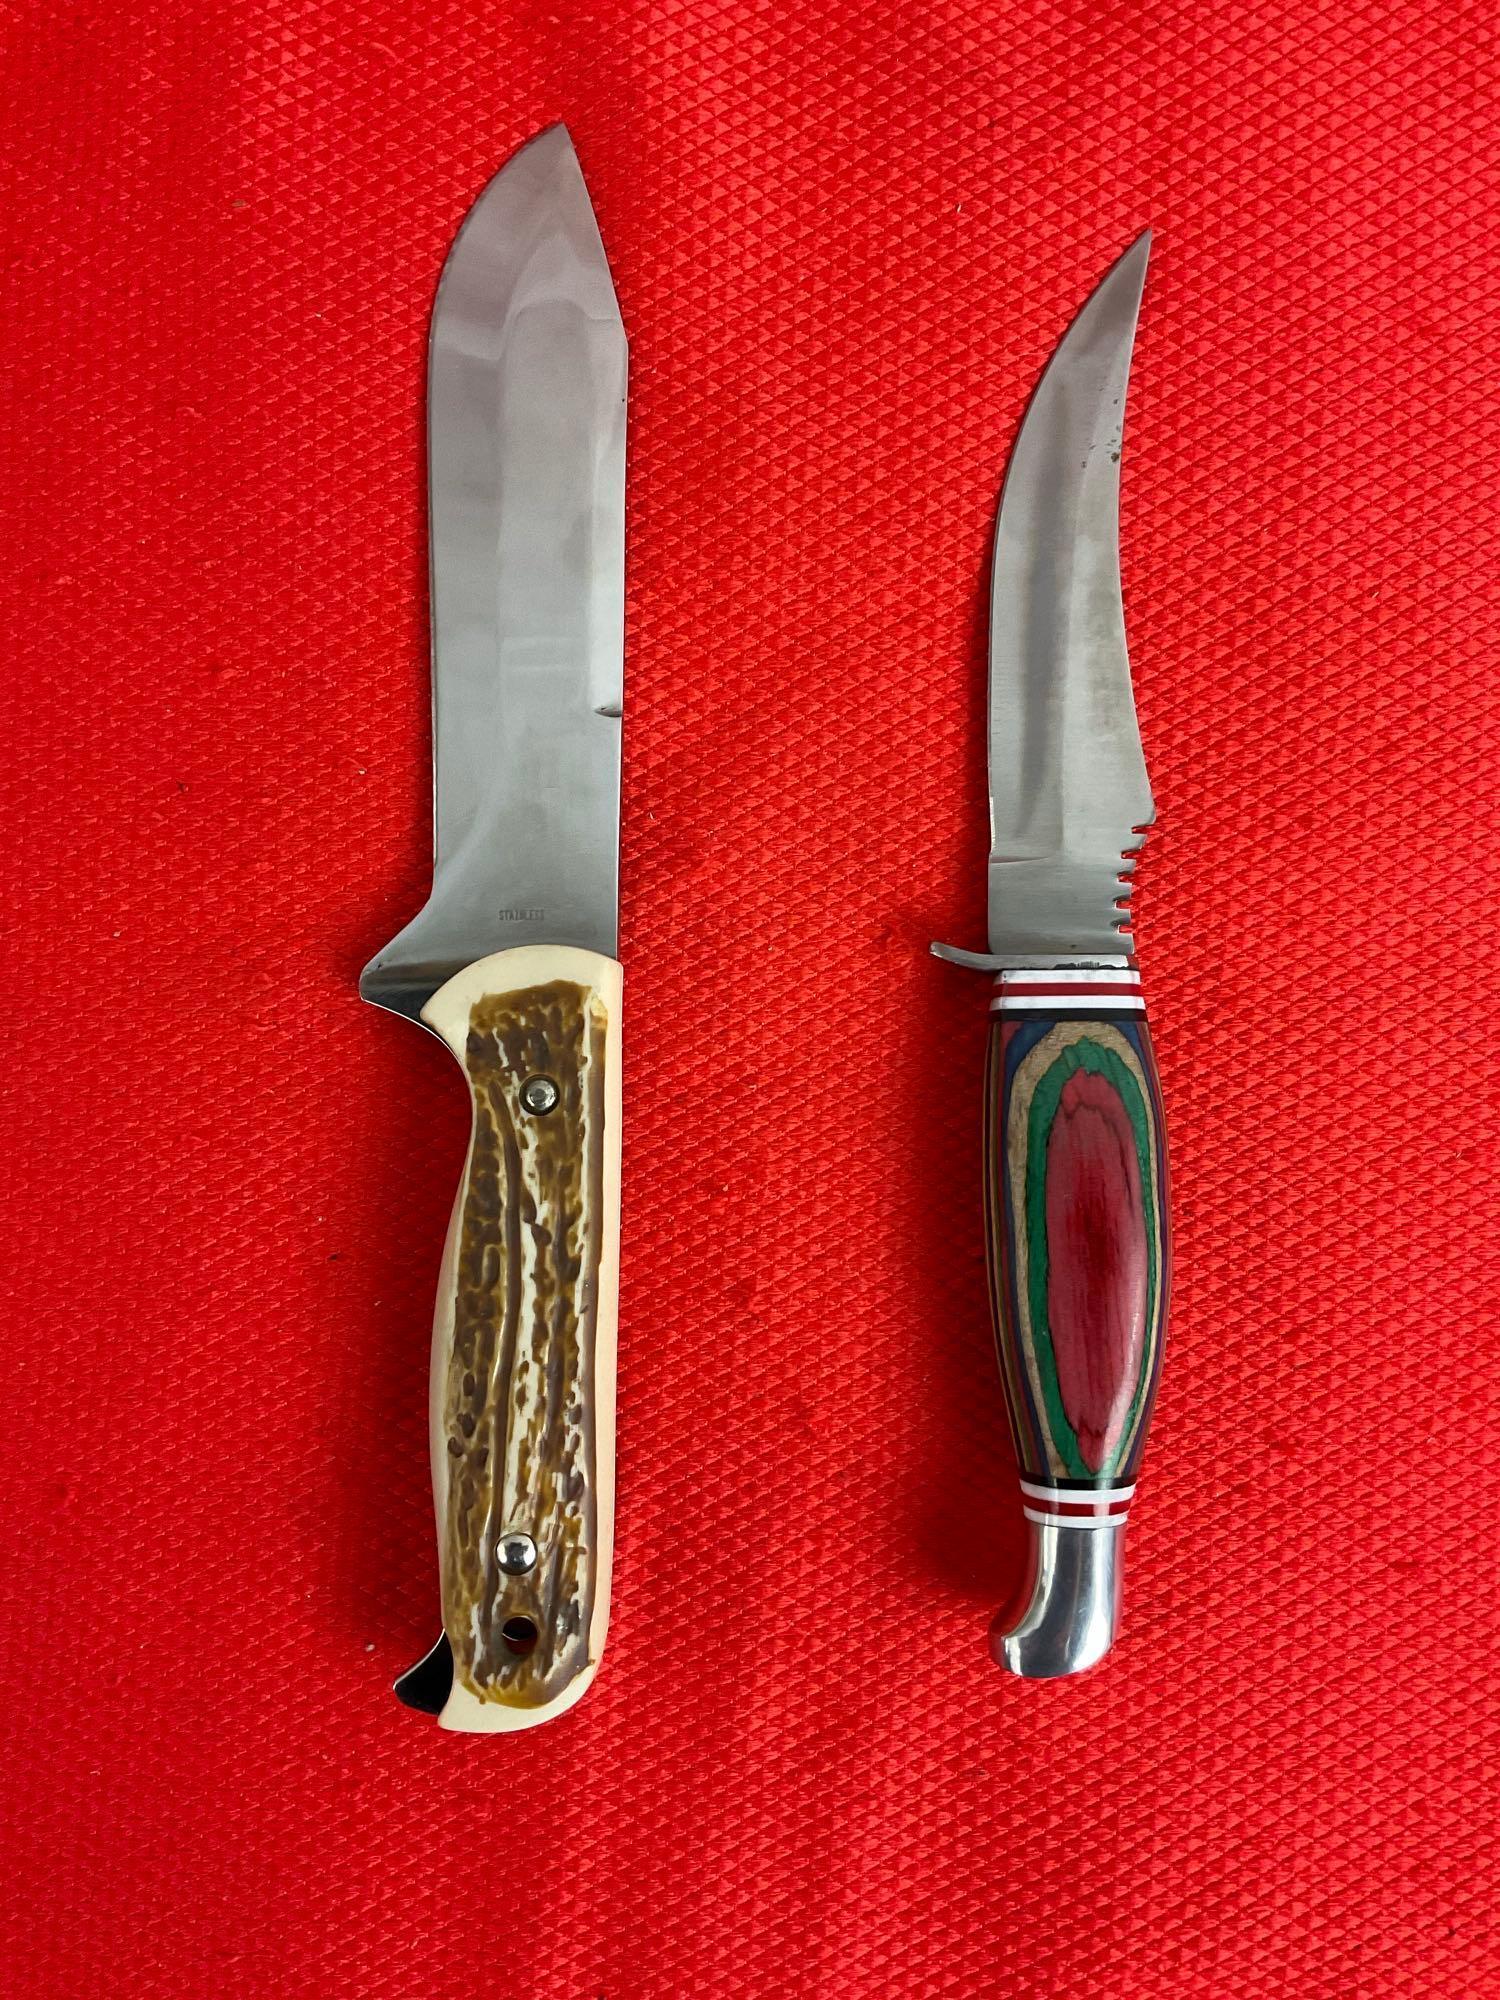 2 pcs Steel Fixed Blade Hunting Knives w/ Sheathes. Unknown Makers. 1 Made in Pakistan. See pics.